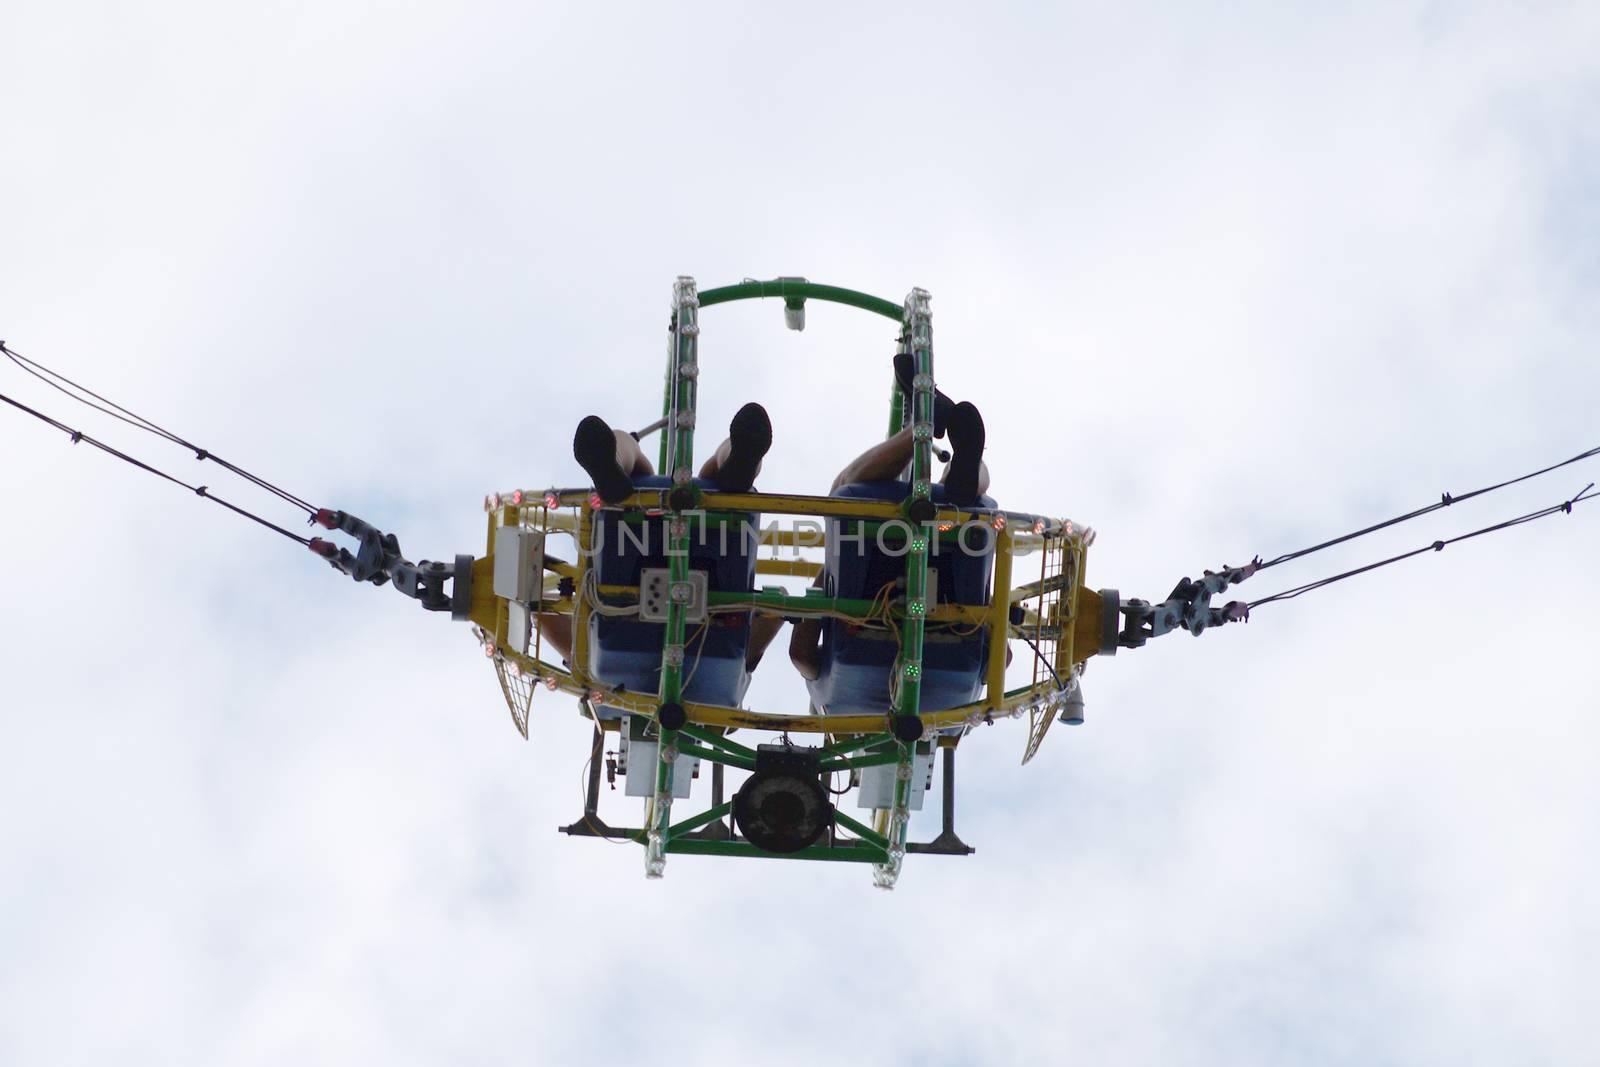 two people on the bungee ride bottom view by Annado